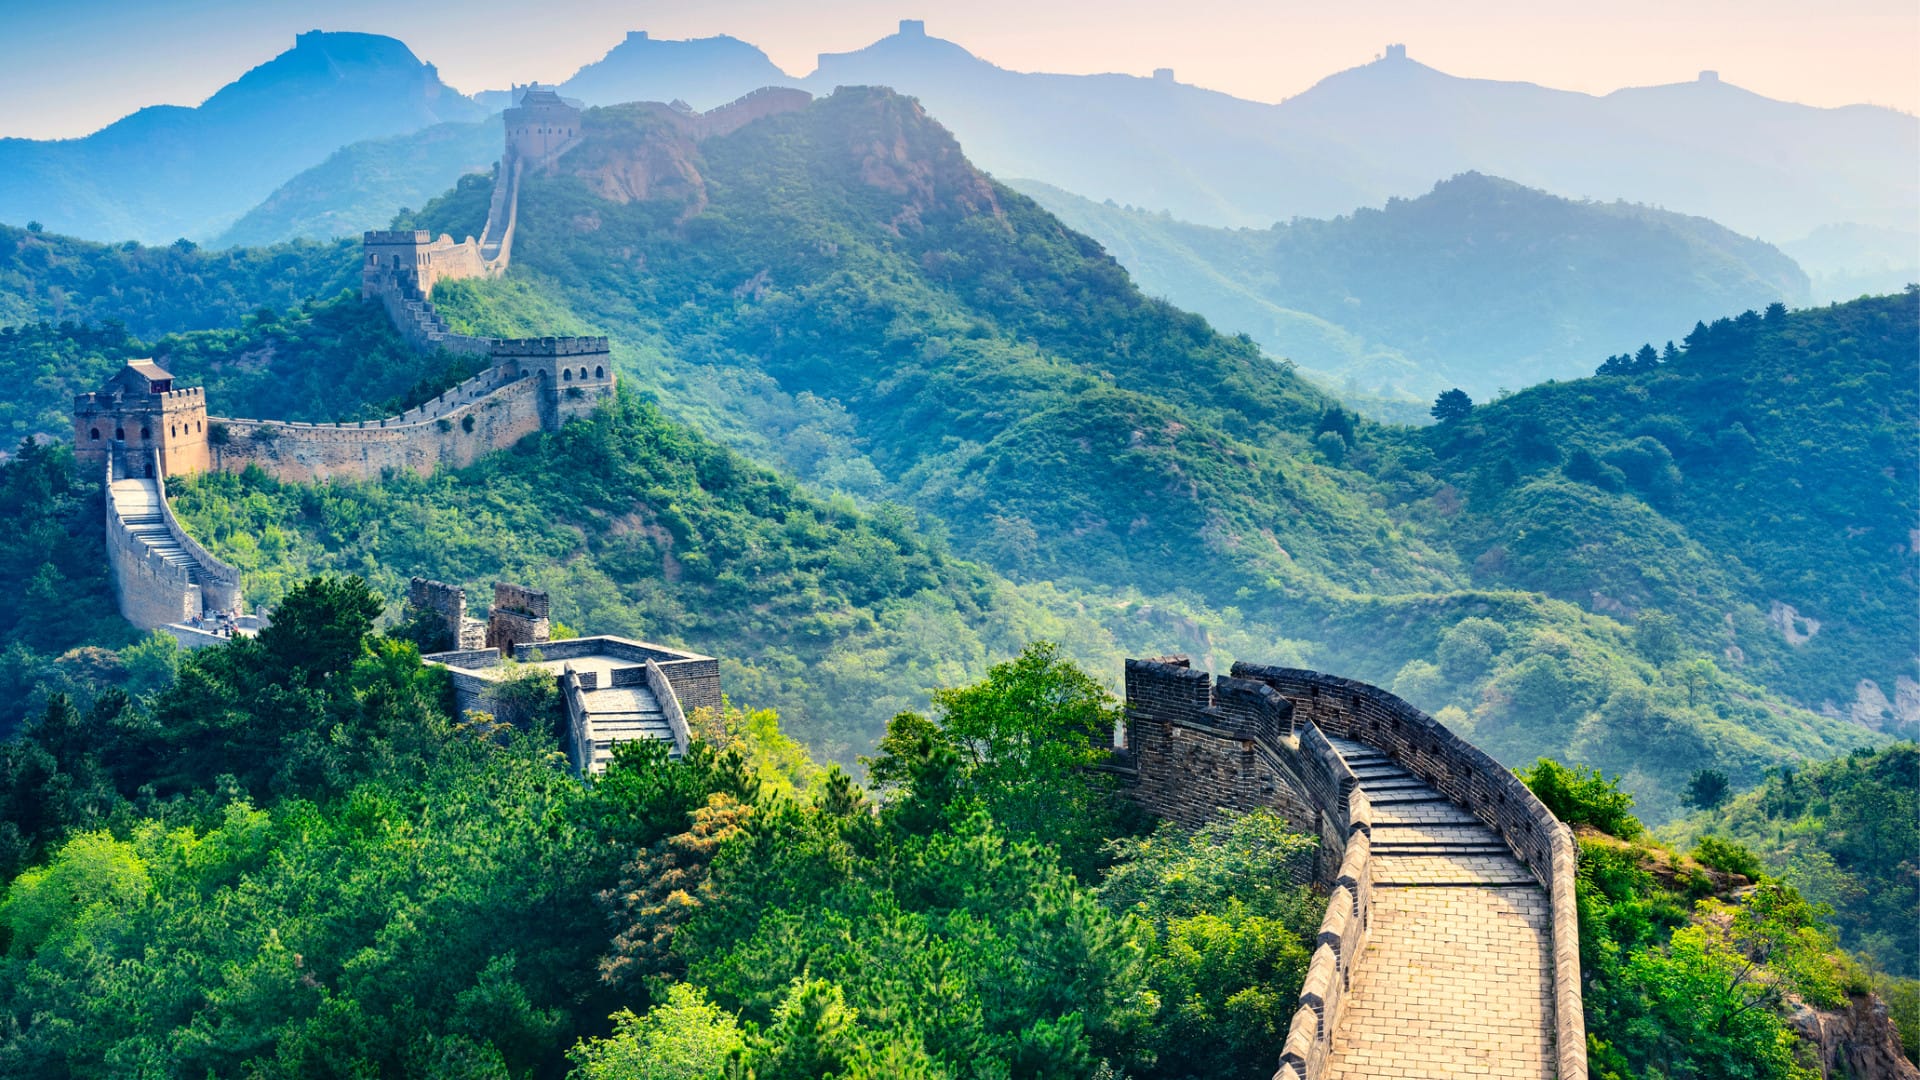 Image of the great wall of China